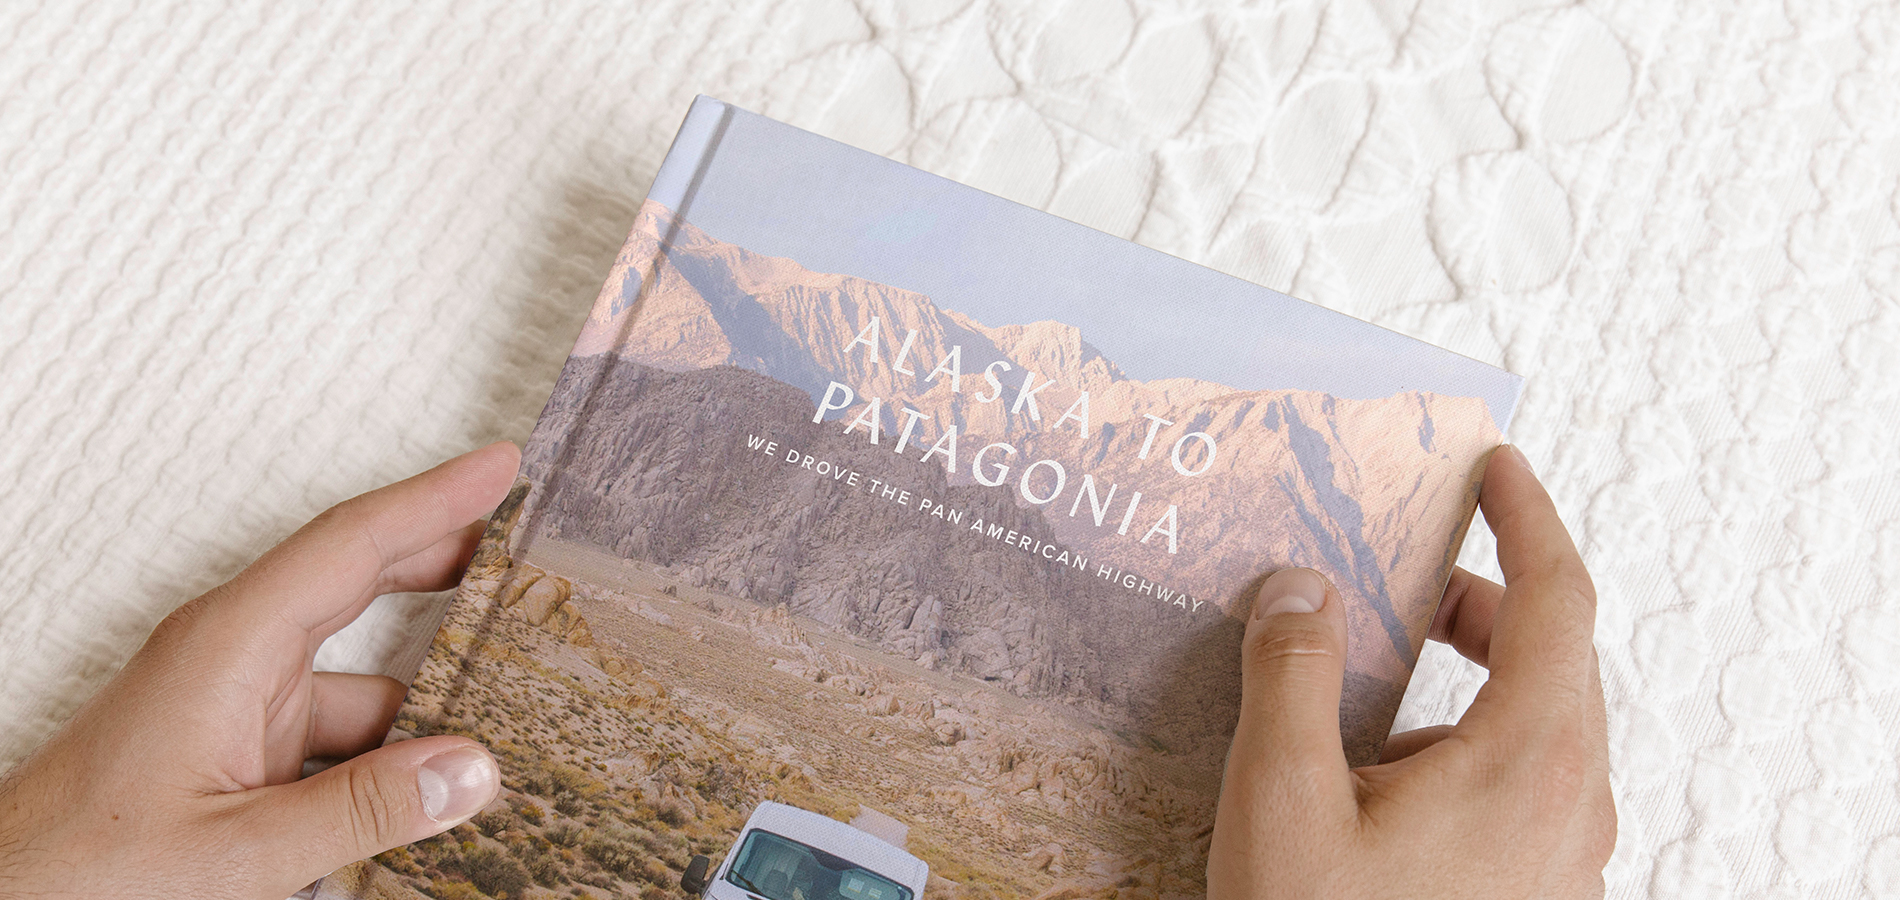 Hands holding Artifact Uprising Photo-Wrapped Hardcover Book titled Alaska to Patagonia featuring photo of camper van in front of mountainous landscape